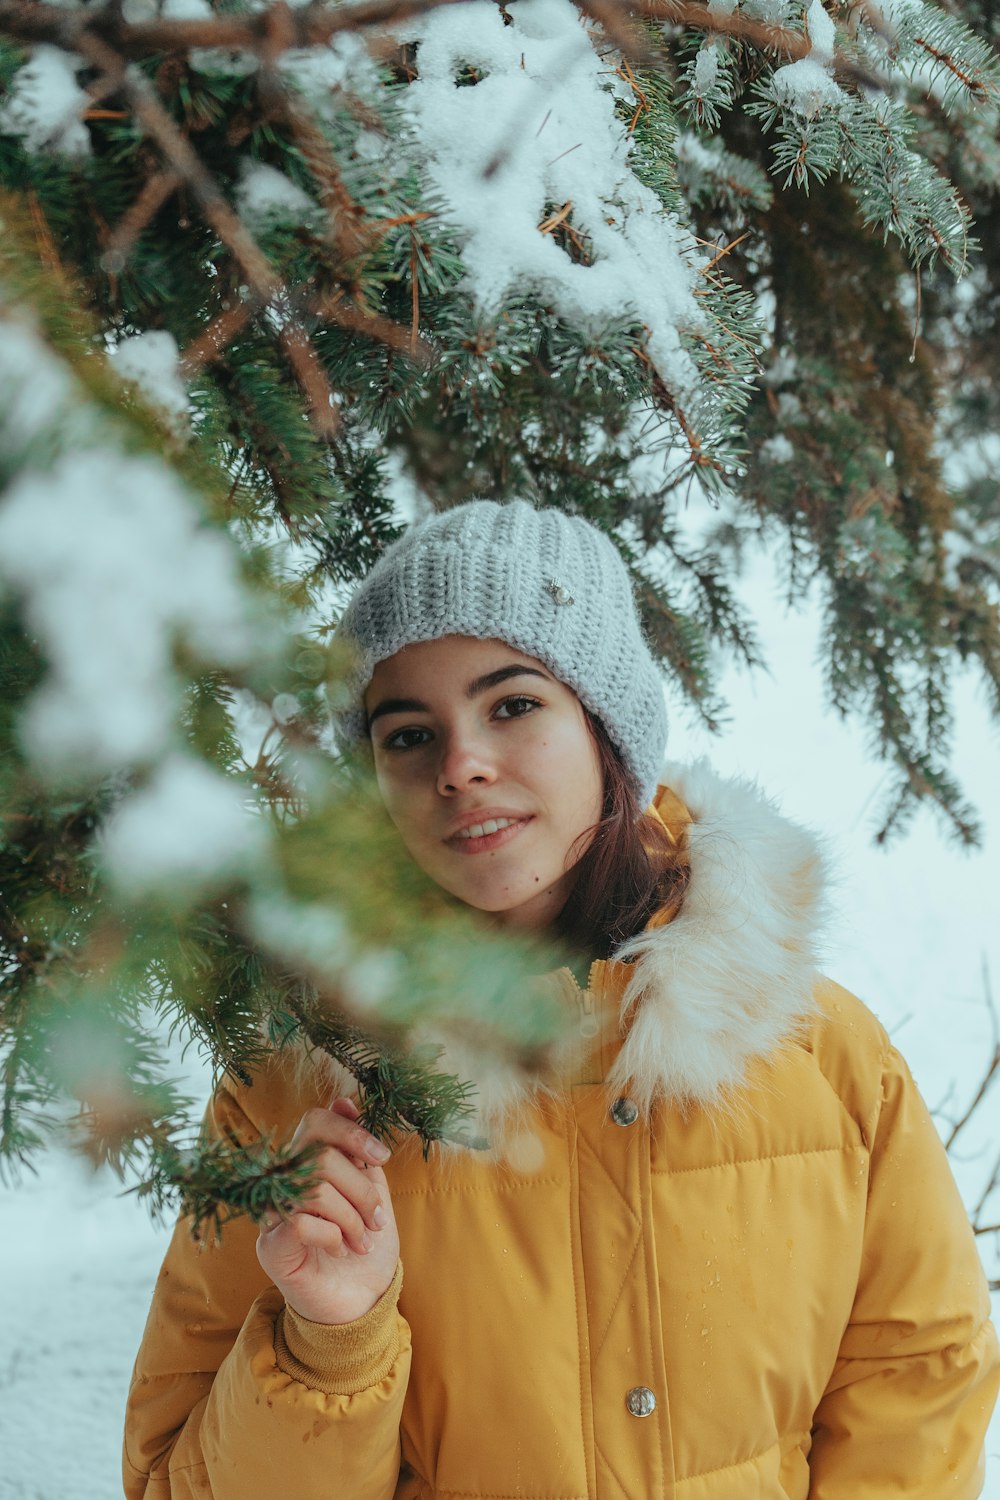 girl in brown jacket and gray knit cap standing near green tree with snow